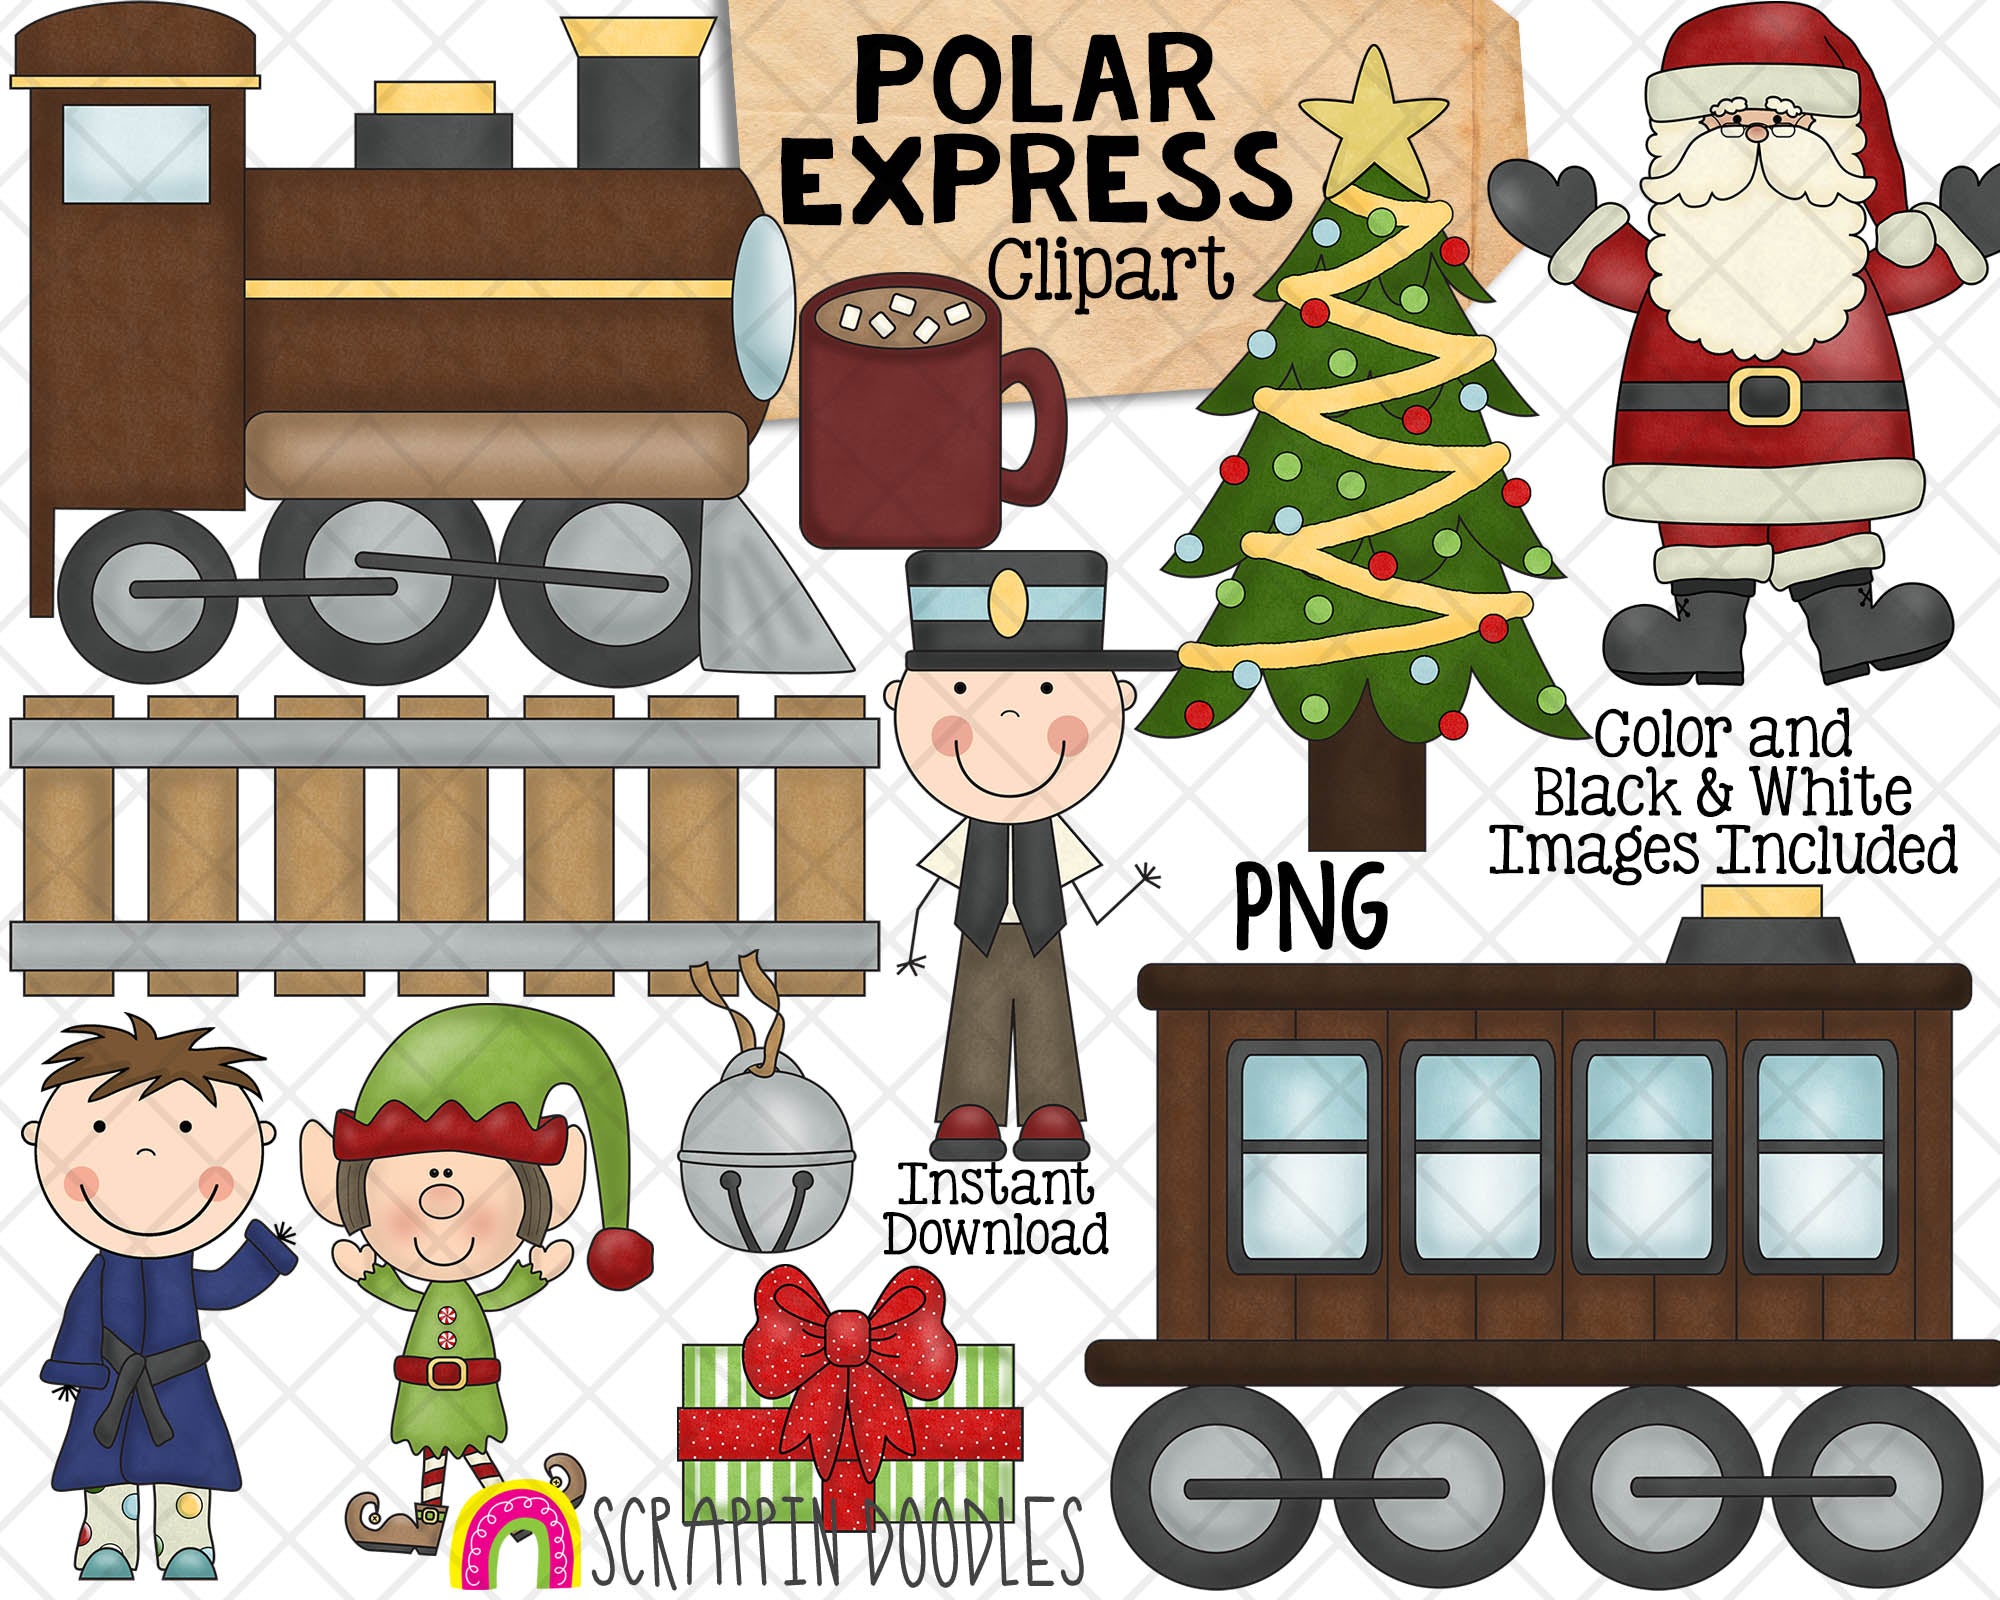 Christmas Mail Clipart, Christmas Delivery Clipart, Christmas Gift Clipart,  Christmas Clipart 